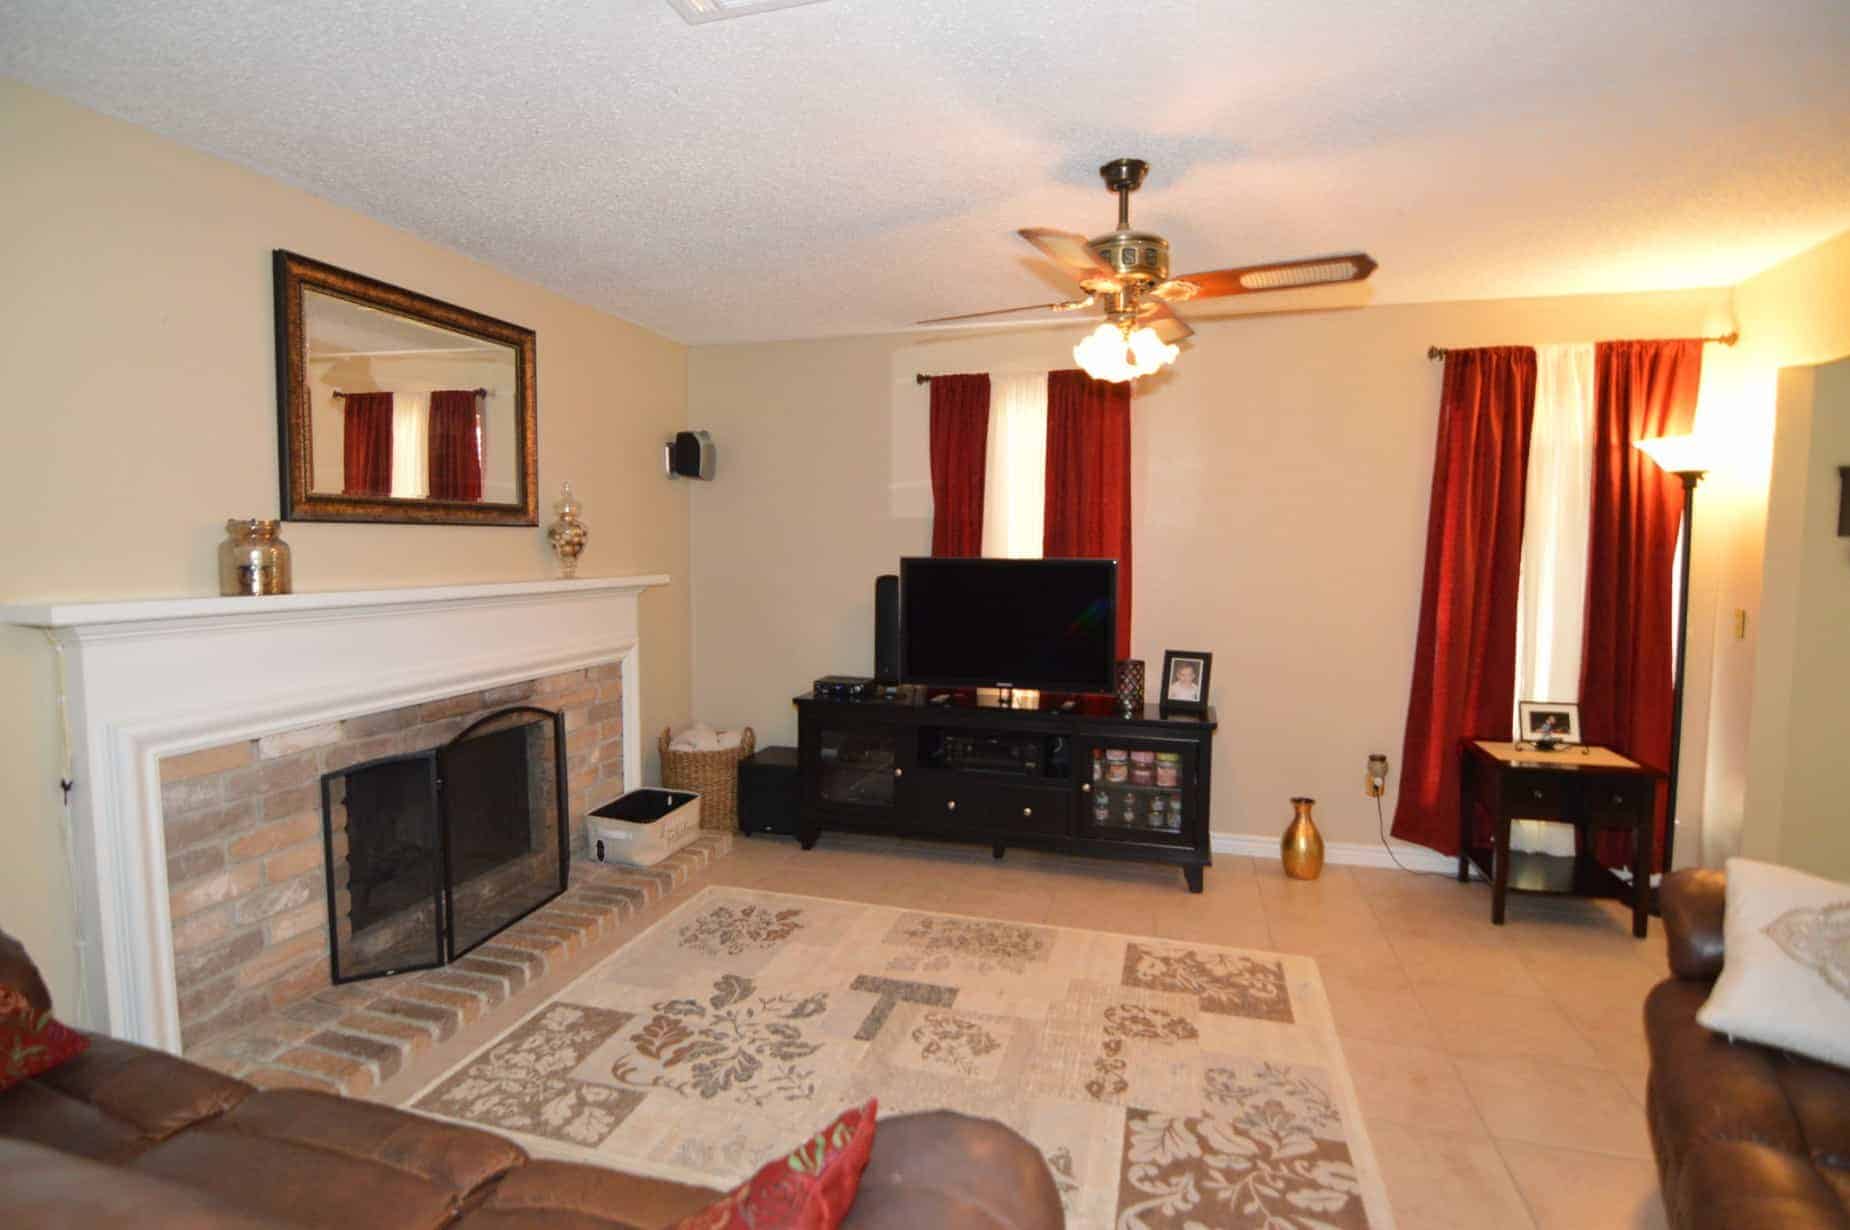 Family Room of 12030 Yearling Dr, Houston, TX 77065